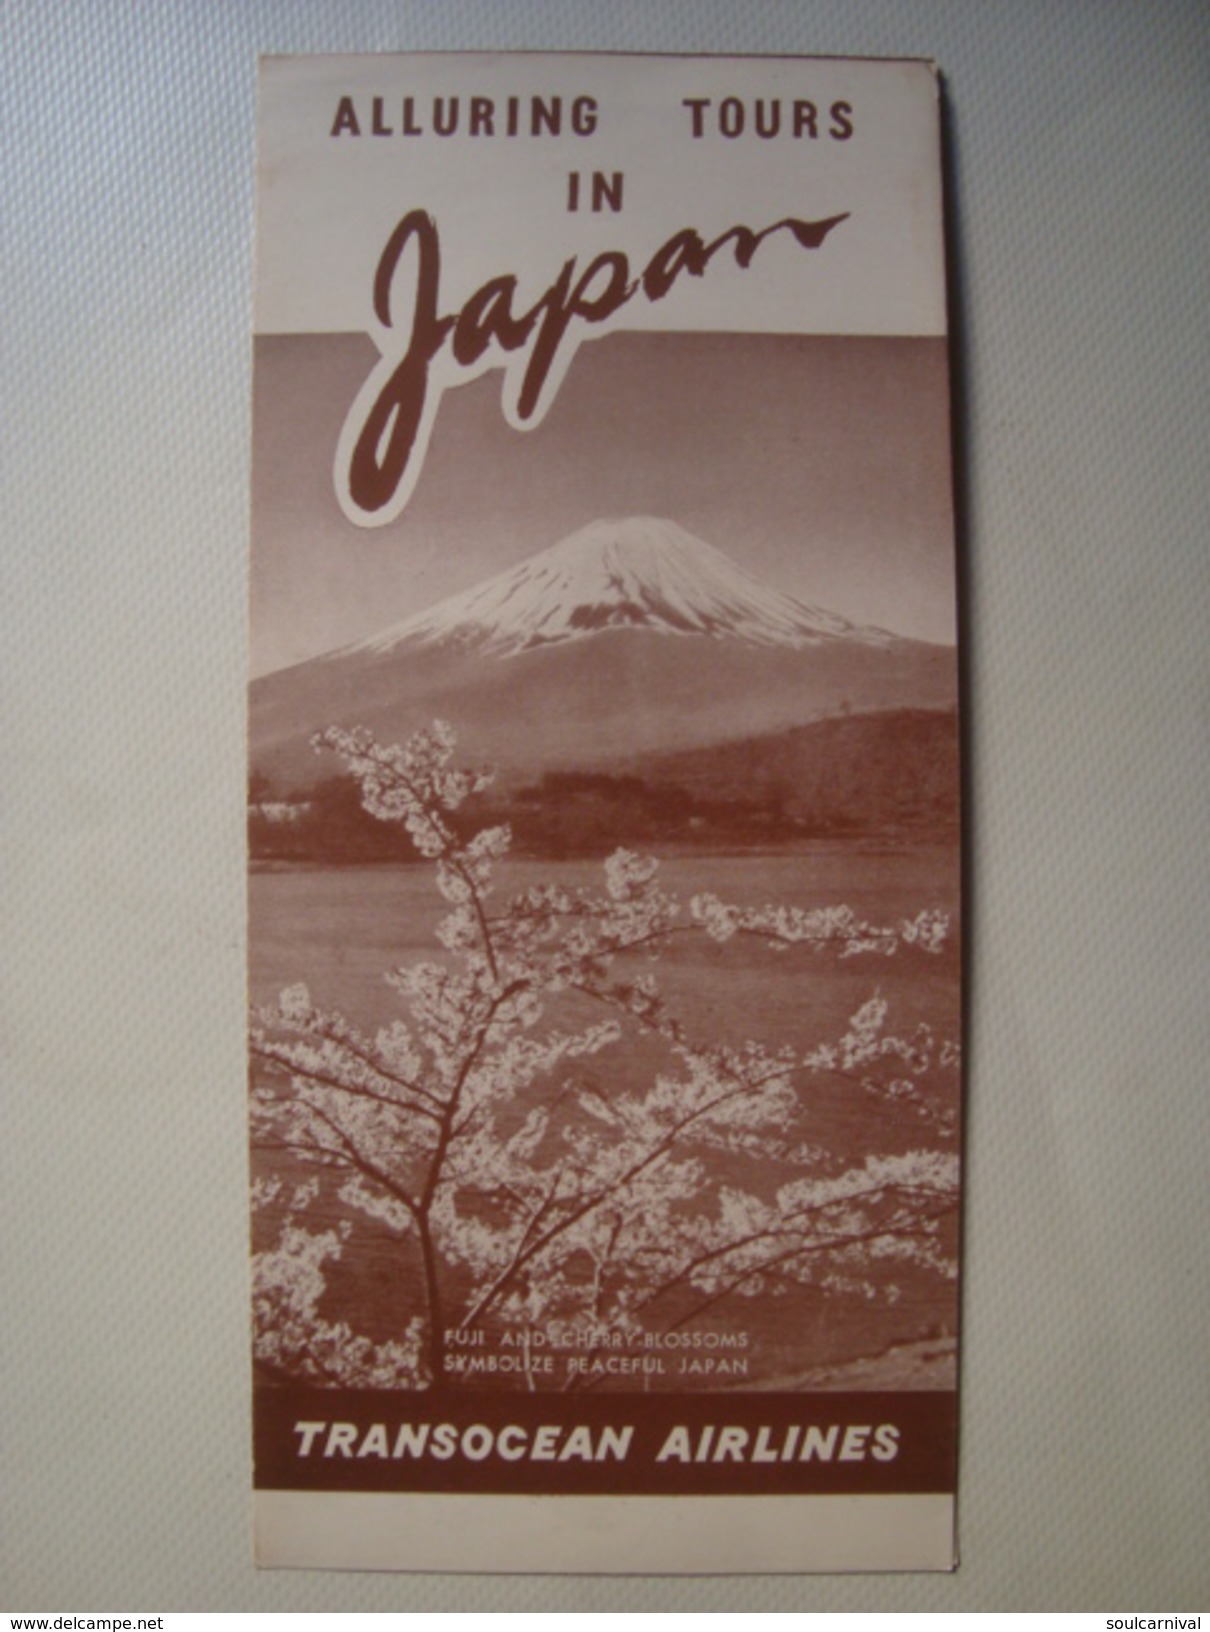 ALLURING TOURS IN JAPAN. TRANSOCEAN AIRLINES. FUJI CHERRY-BLOSSOMS PEACEFUL JAPAN - 1950 APROX. MADE IN OCCUPIED JAPAN. - Publicités